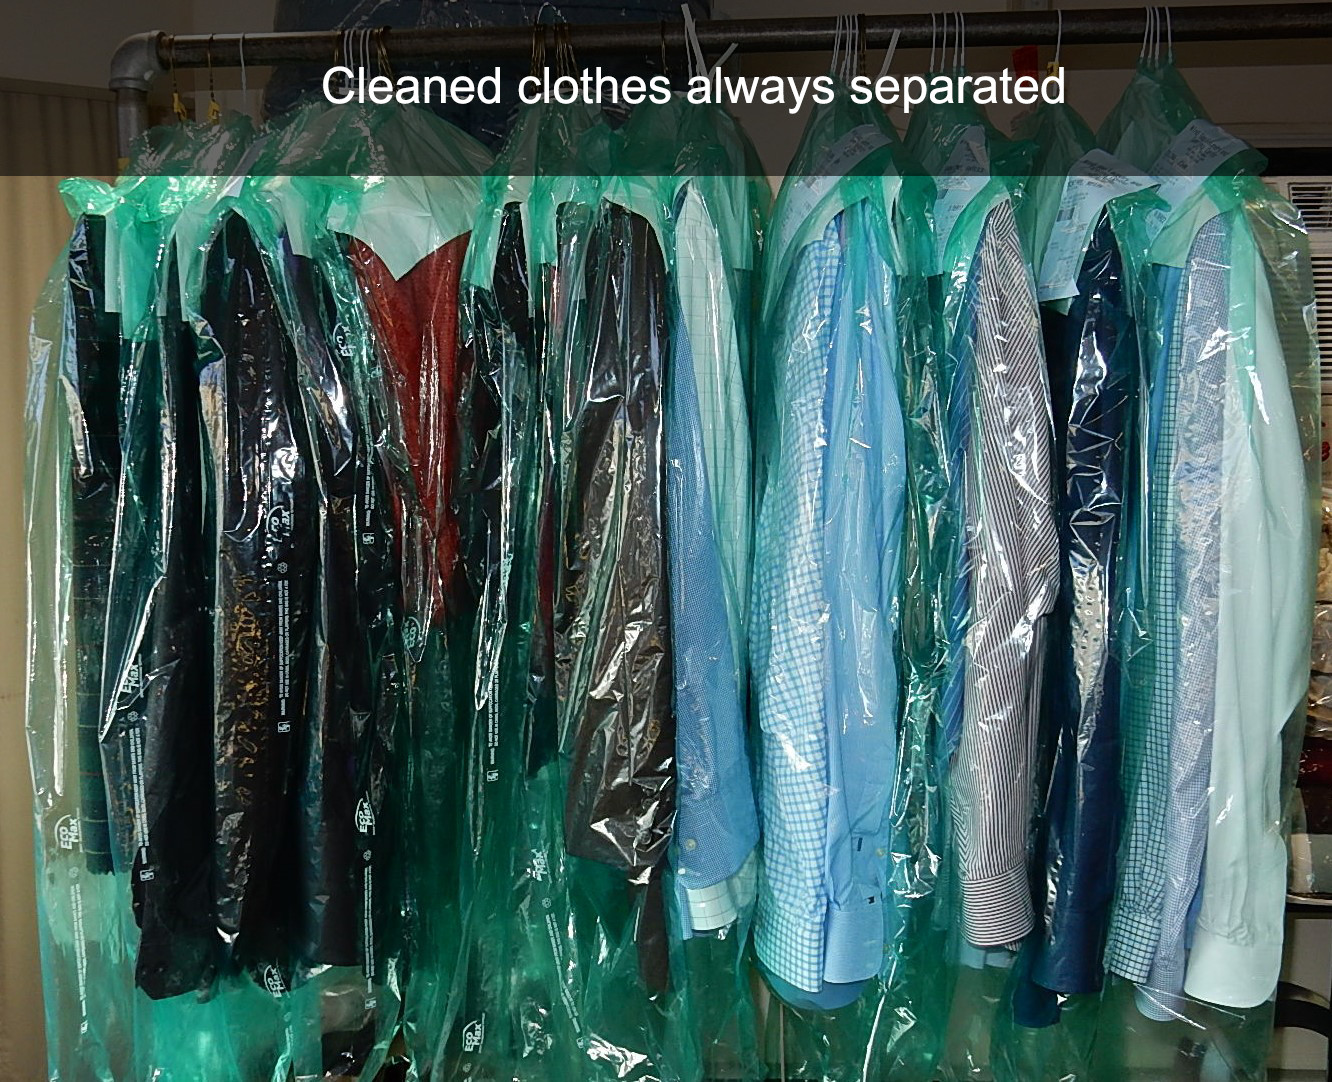 Cleaned clothes always separated